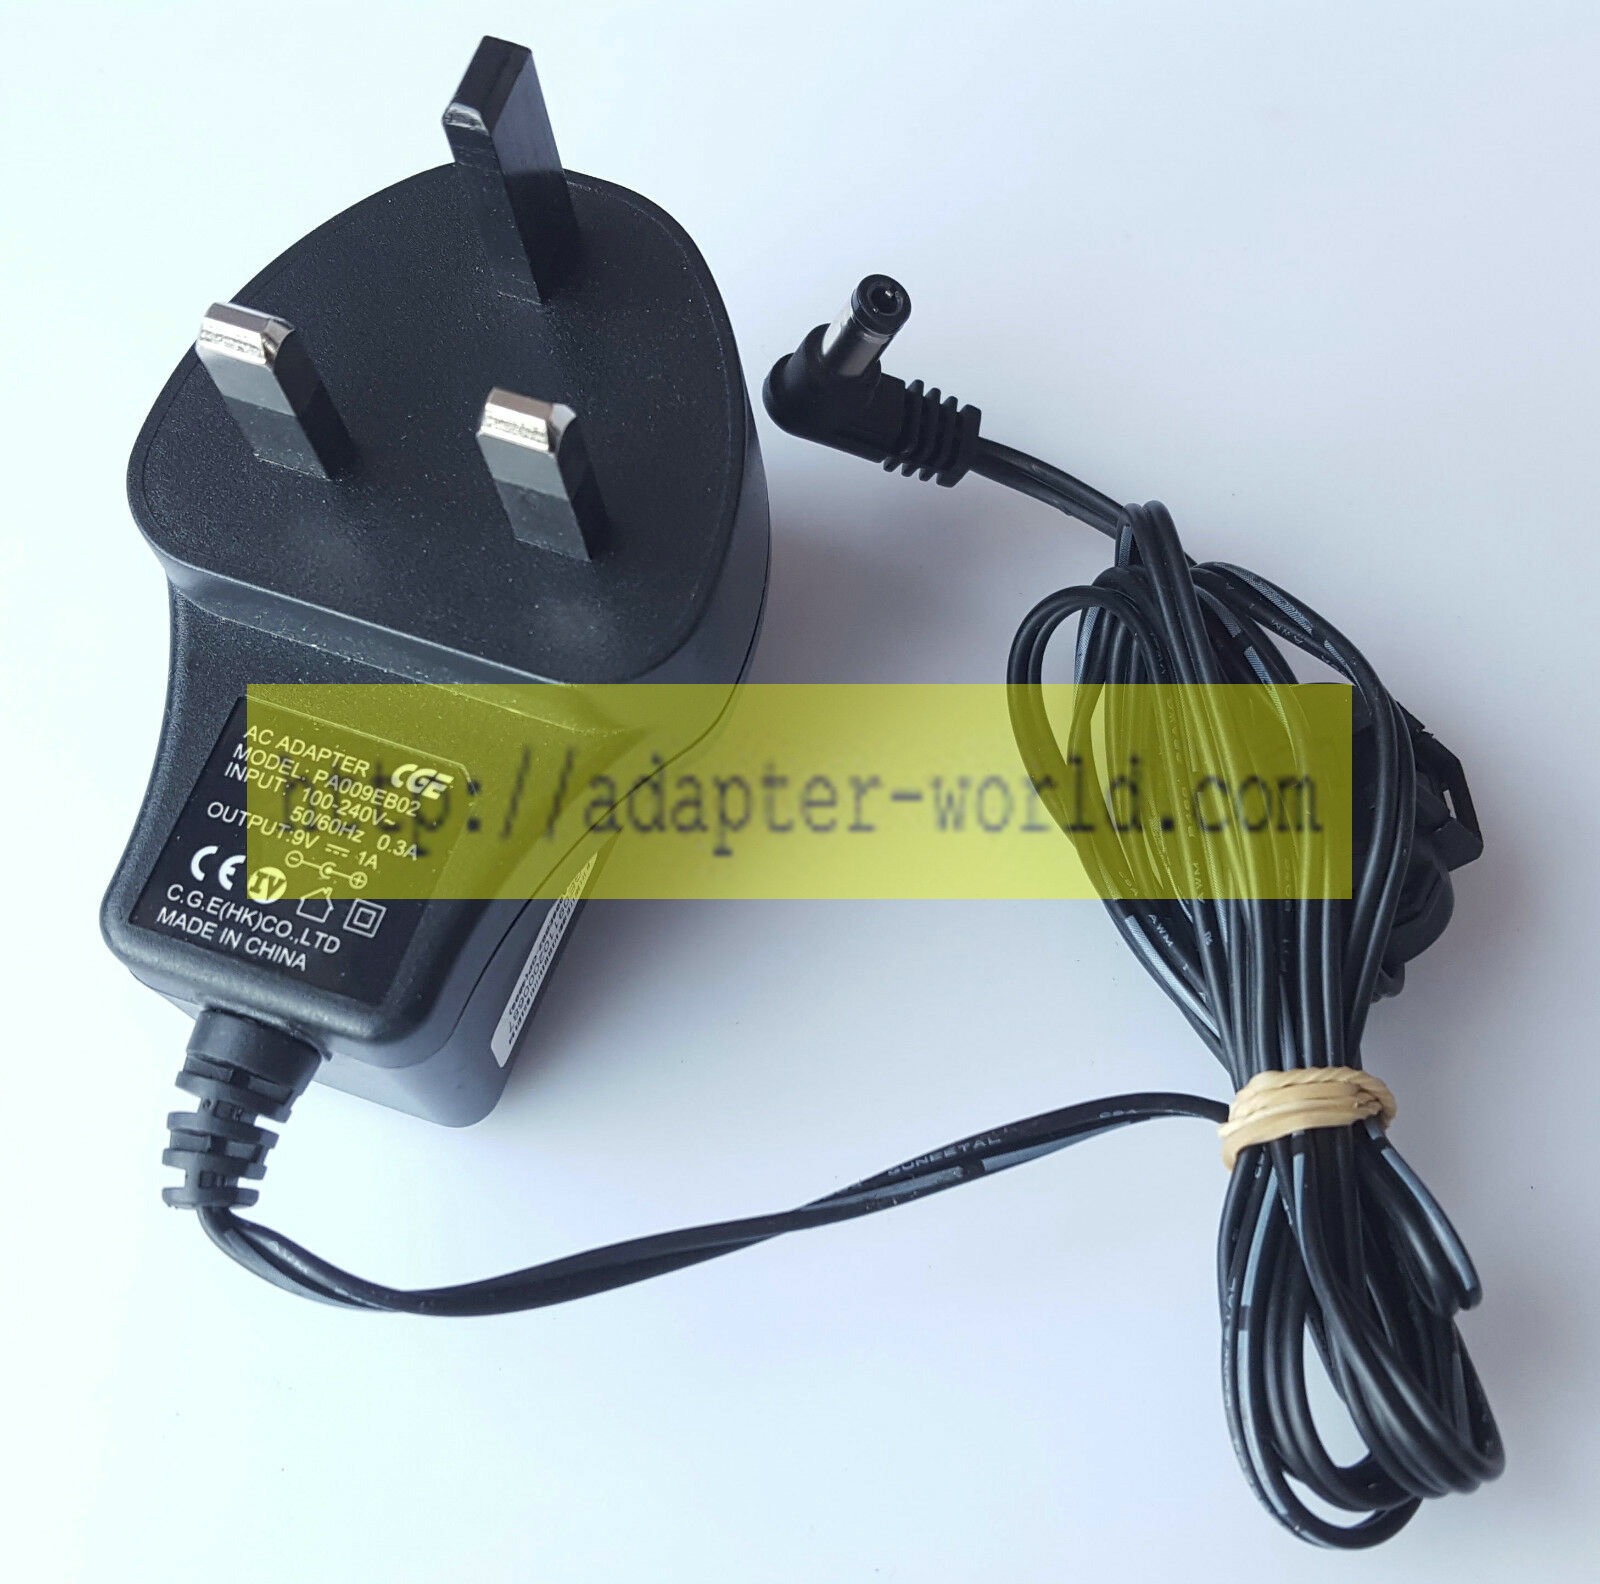 *Brand NEW*9V 1.0A AC/DC ADAPTER CGE PA009EB02 POWER SUPPLY Item specifics: Brand:CGE MODEL: PA009EB02 INPUT: